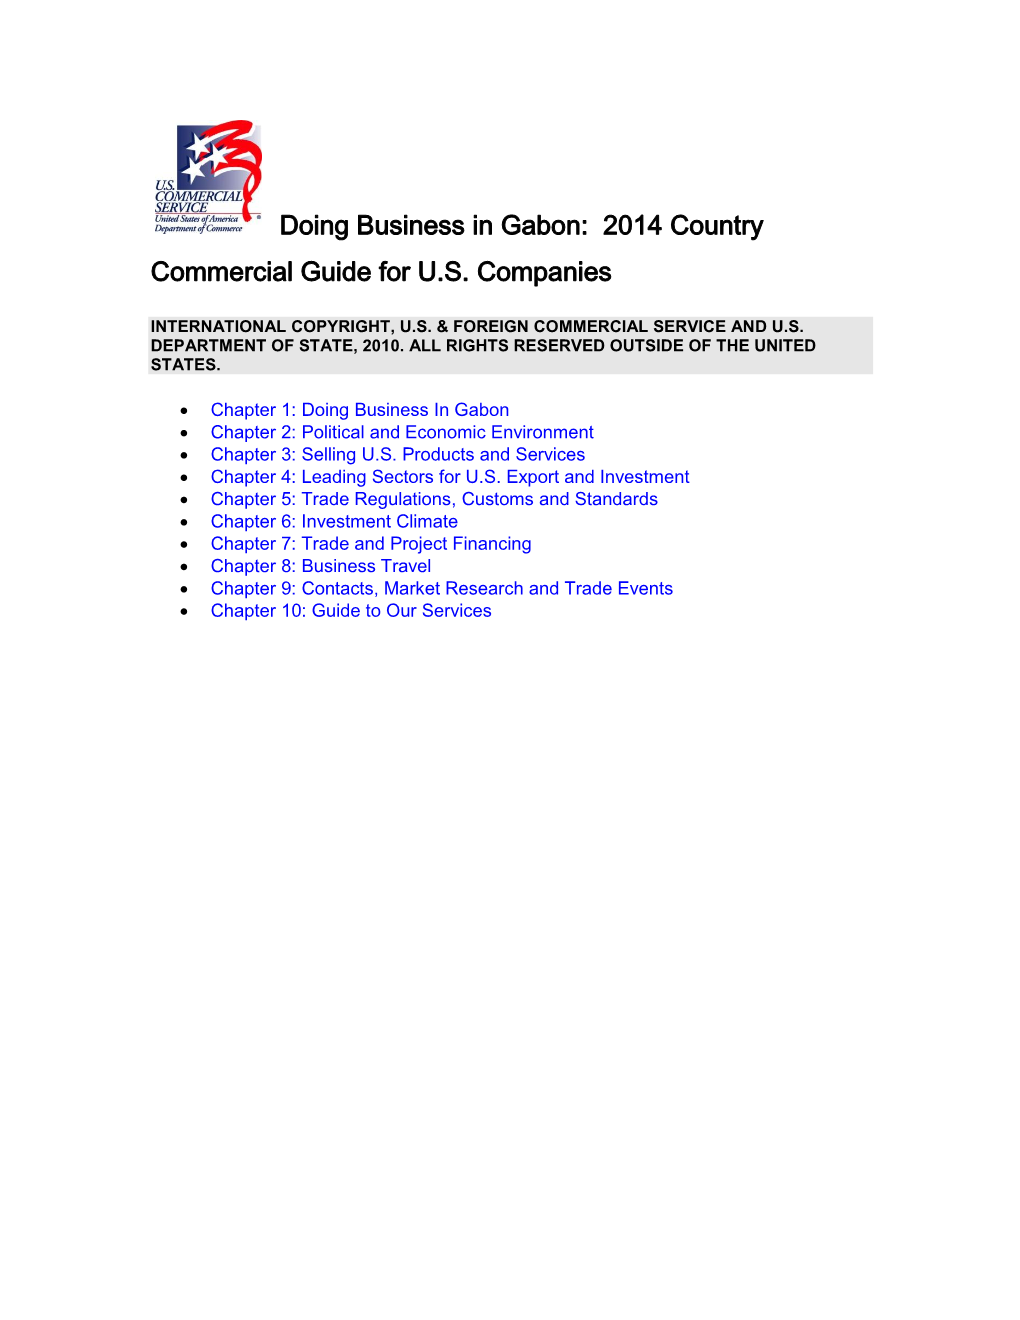 Doing Business in Gabon: 2014 Country Commercial Guide for U.S. Companies